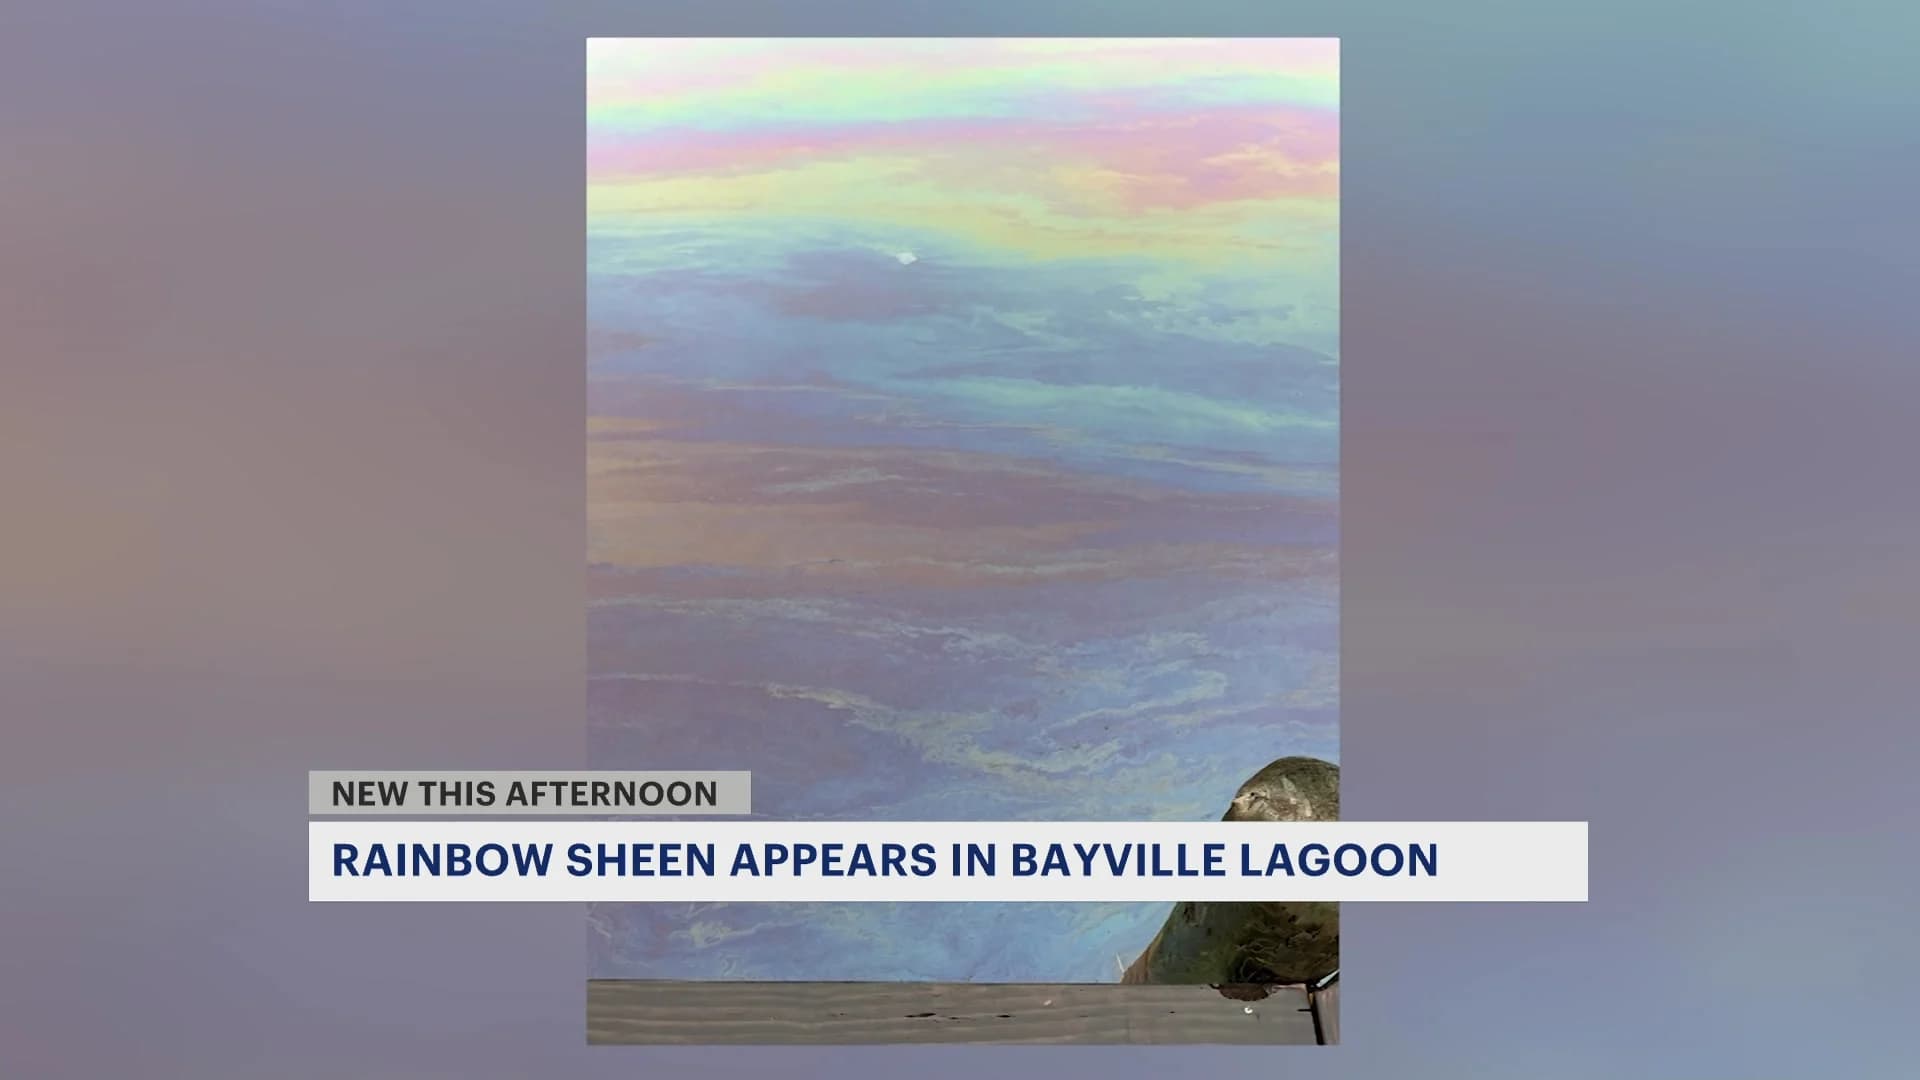 Police: Rainbow sheen on Bayville lagoon believed to be hydraulic